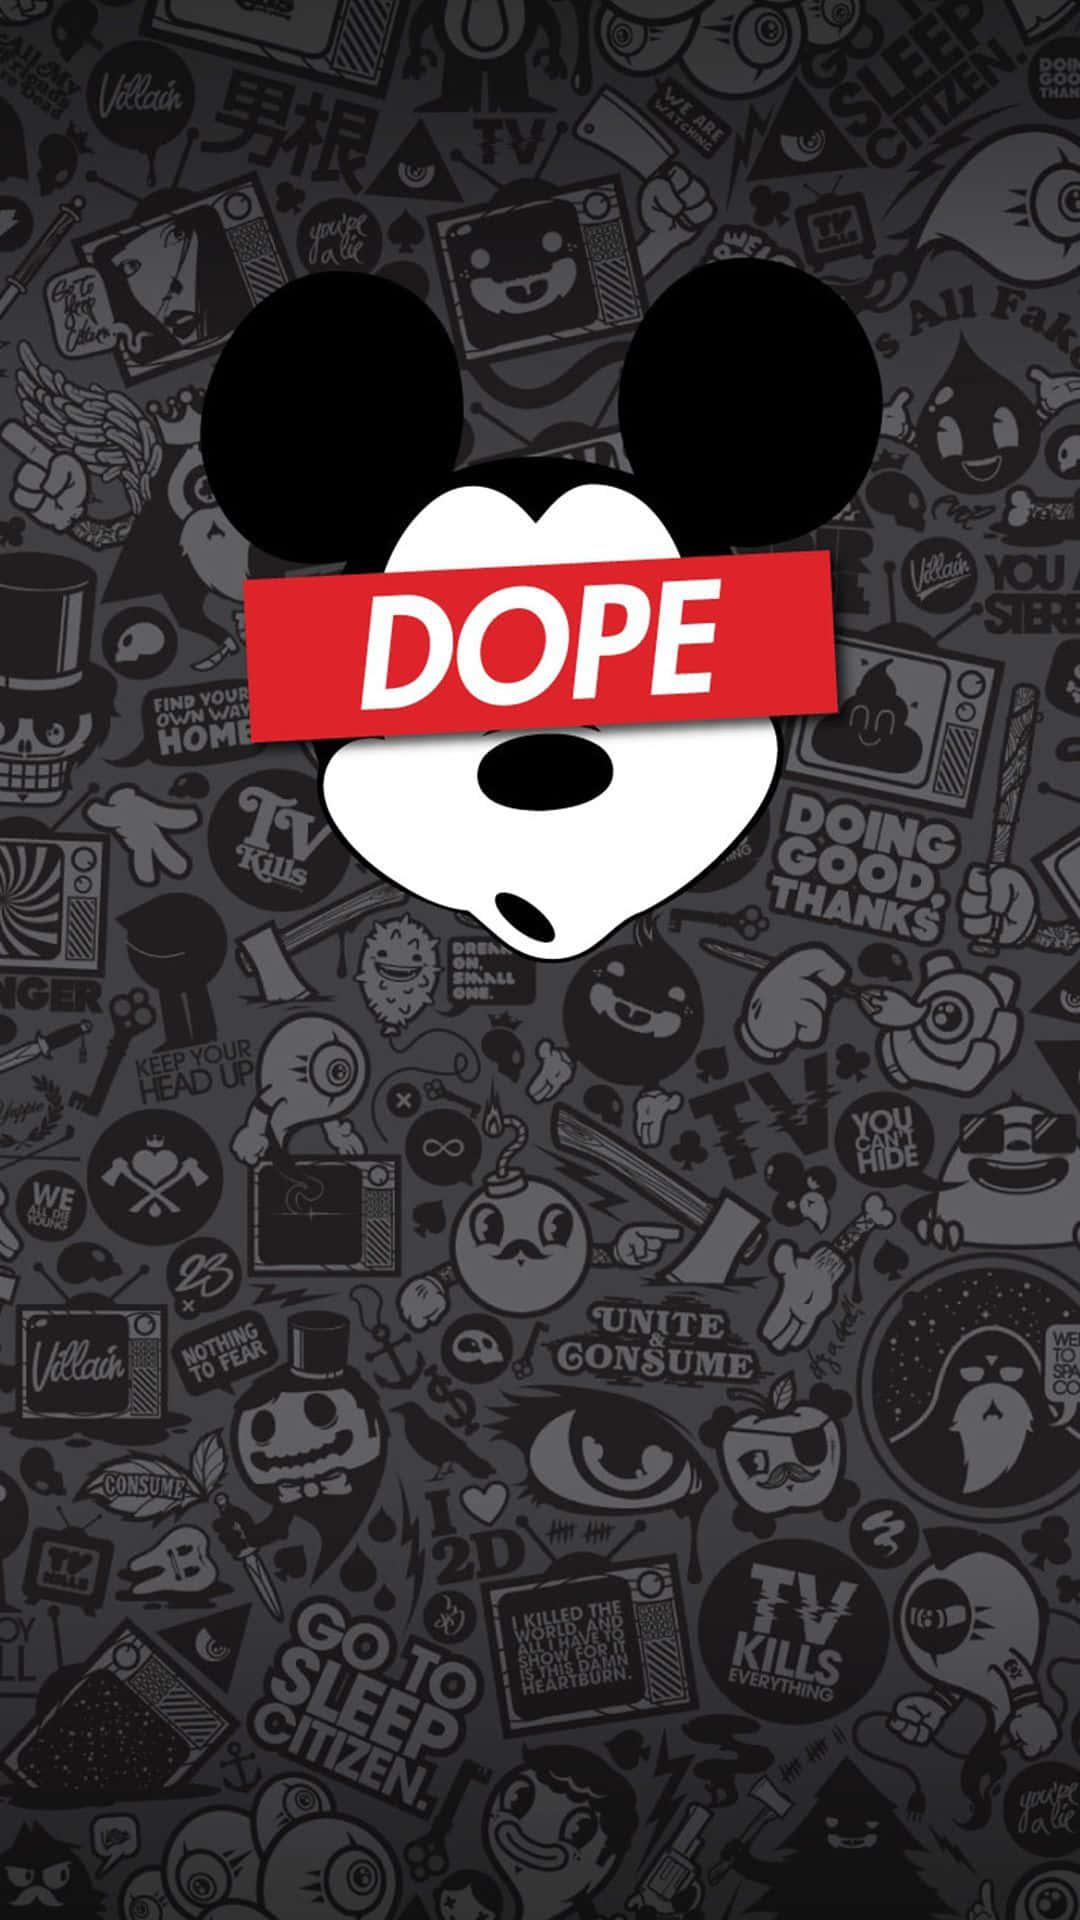 Mickey Mouse Cool 1080 X 1920 Wallpaper